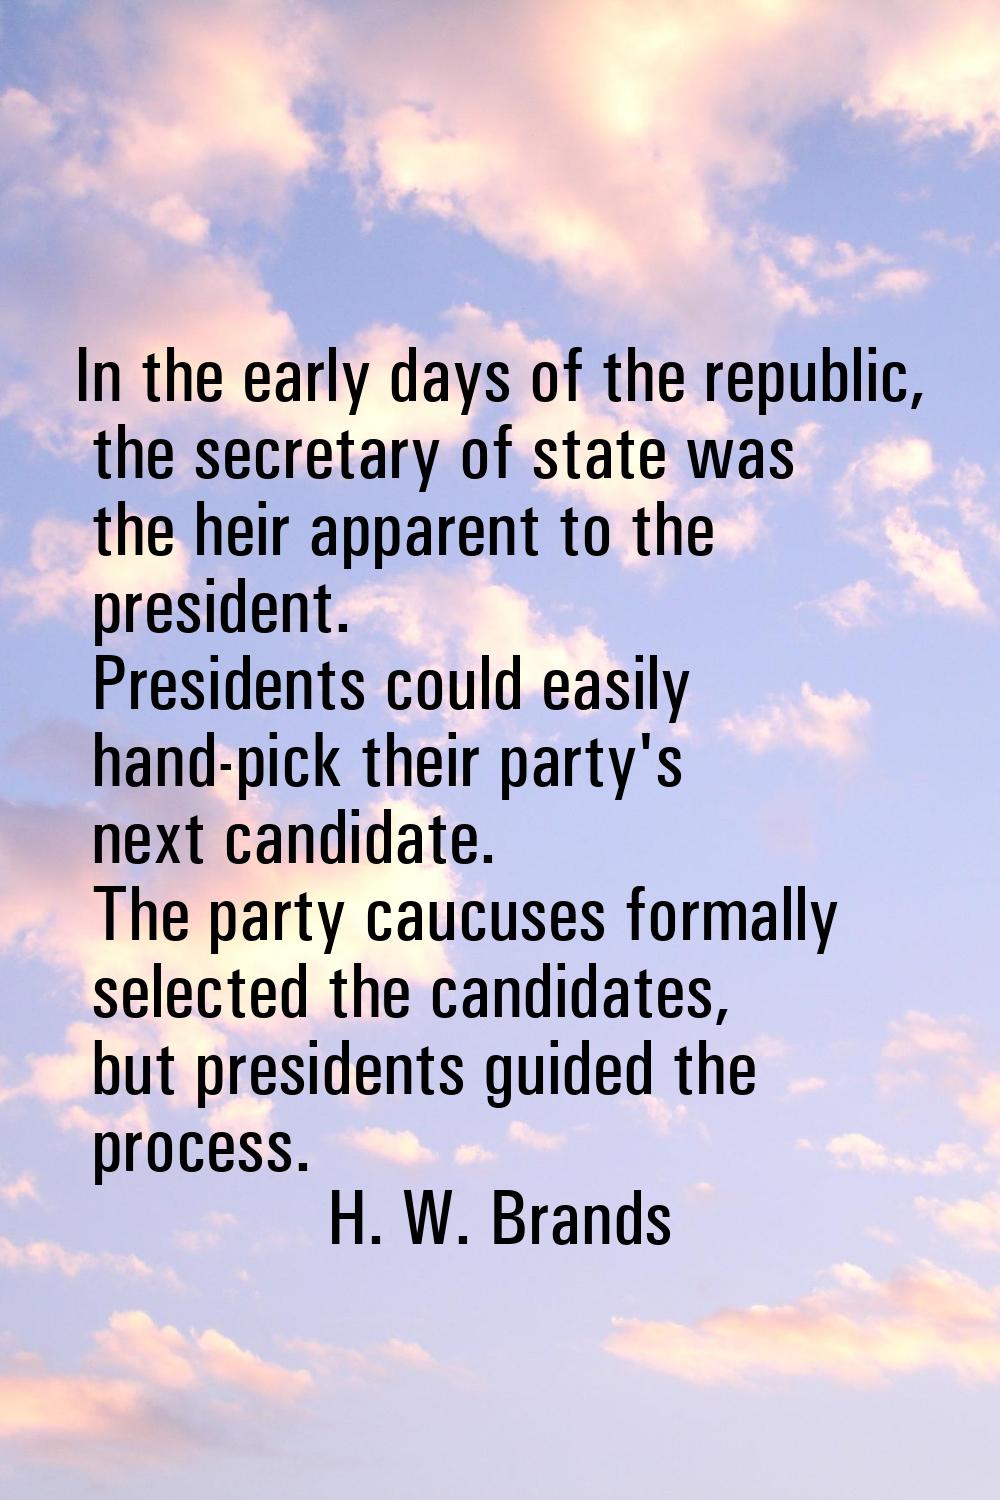 In the early days of the republic, the secretary of state was the heir apparent to the president. P